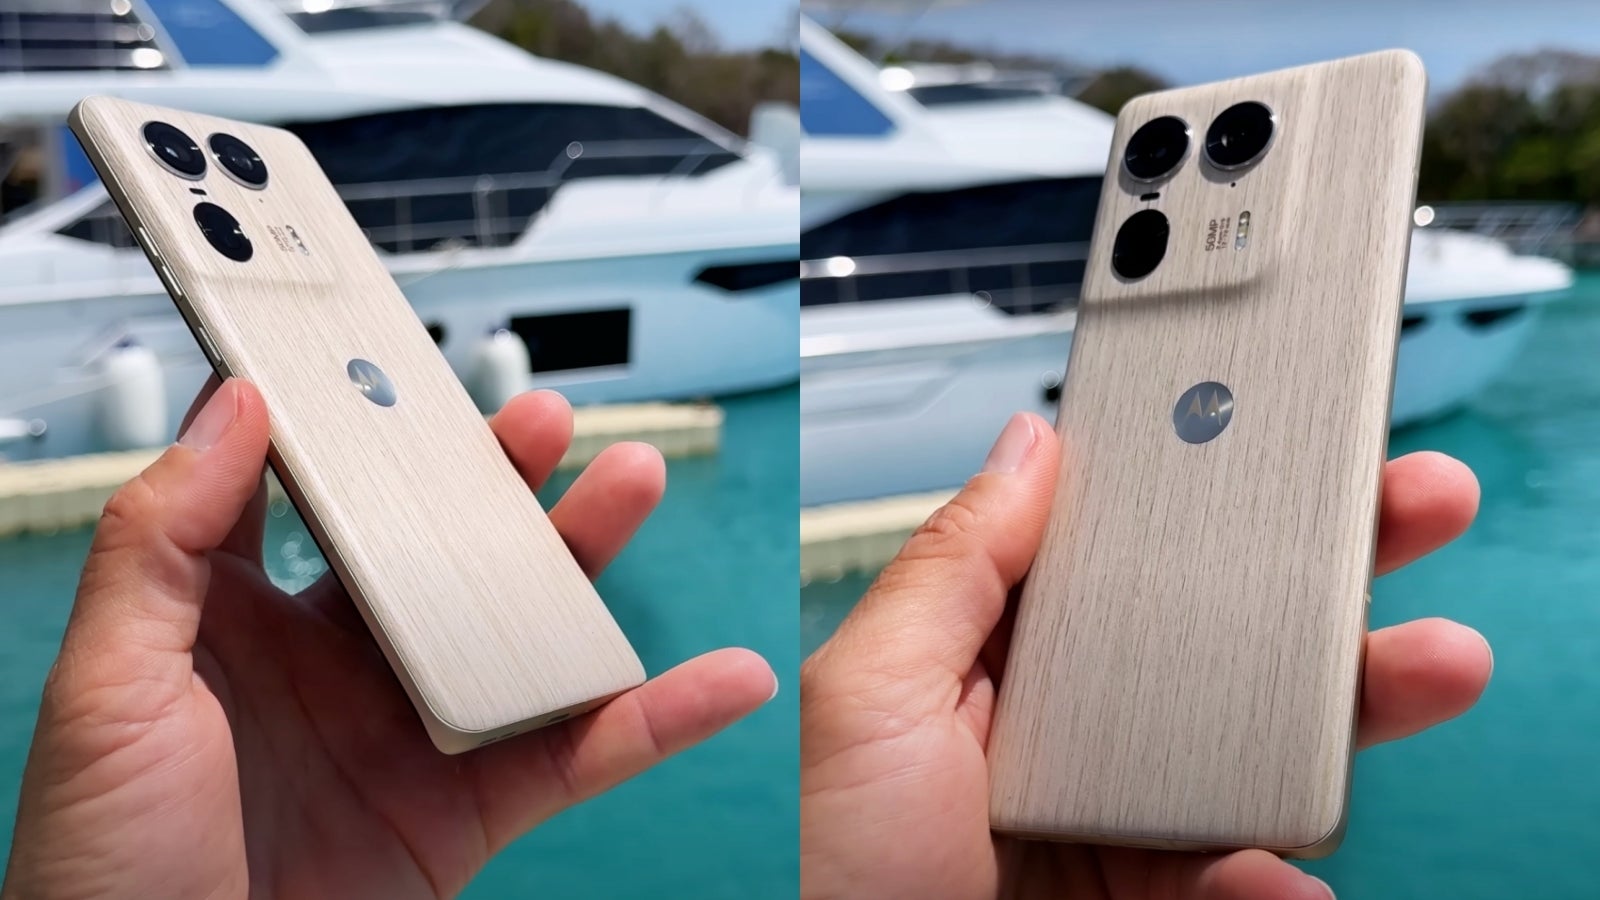 That’s a good looking wooden phone! But even if you can, don’t buy it yet - wait for our review. - Trees died for Motorola&#039;s $1,000 wooden flagship: Why I wish my iPhone was made out of wood!